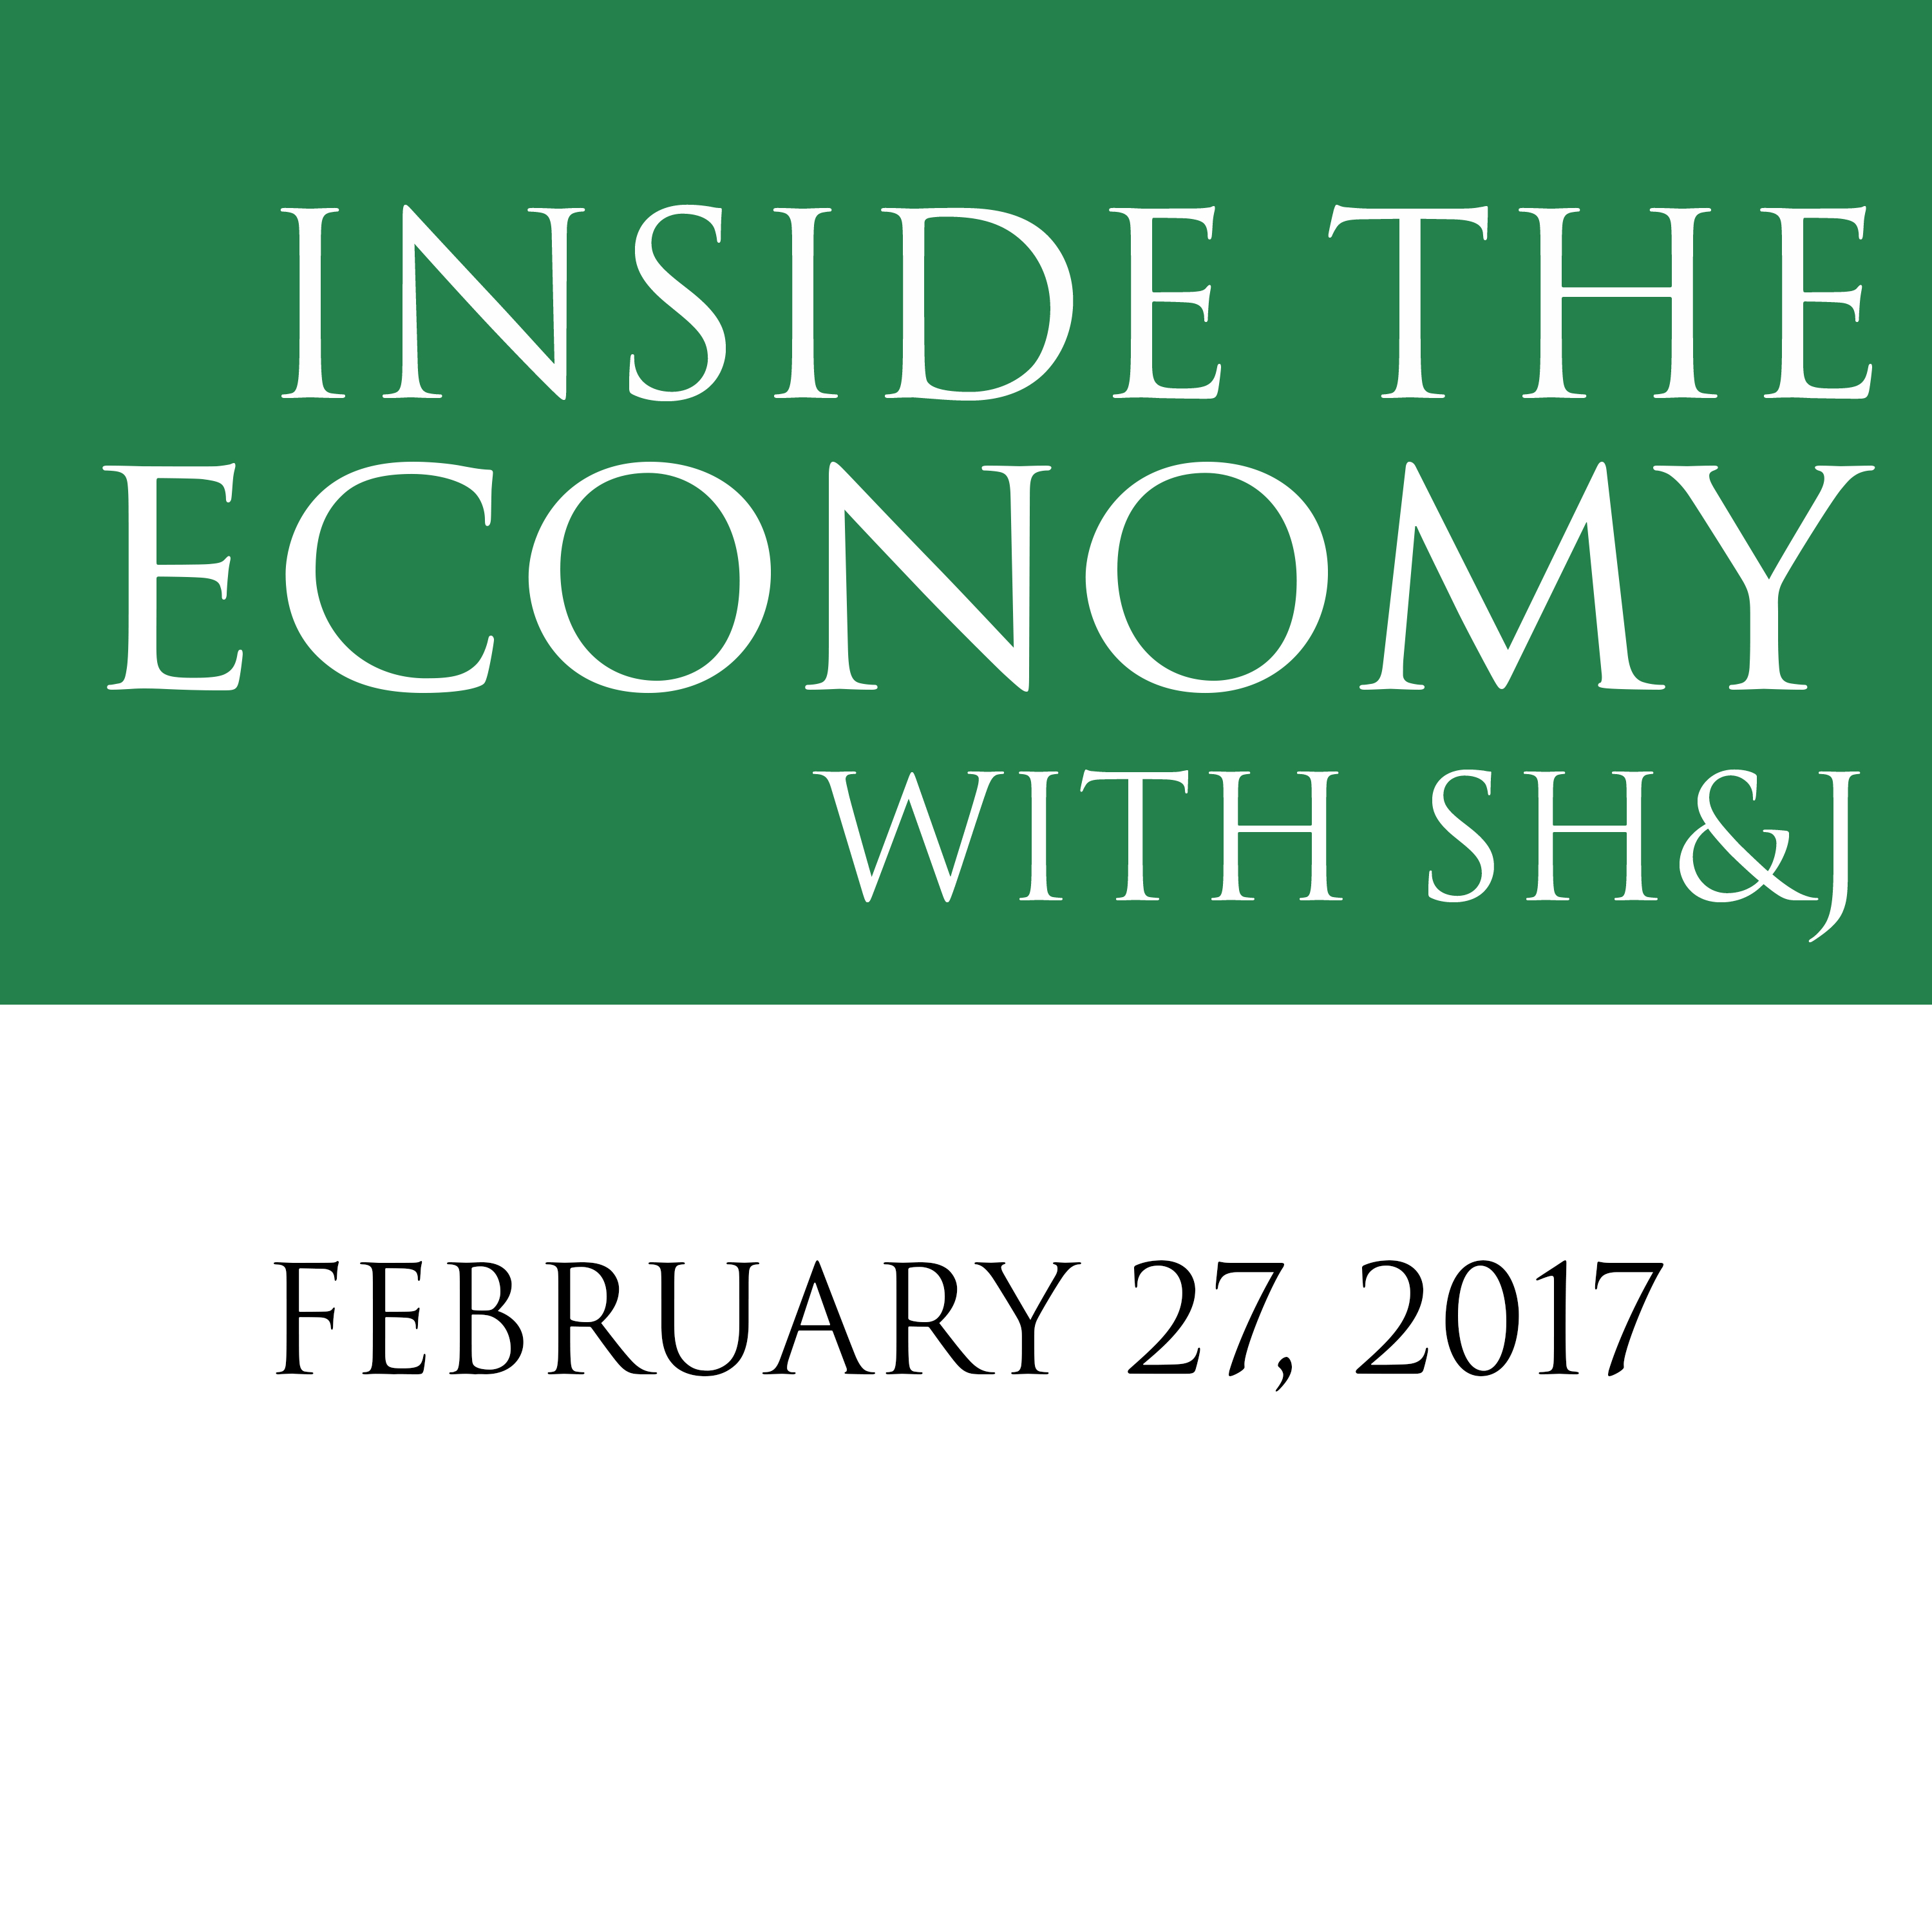 February 27, 2017  --  Inside the Economy with SH&J